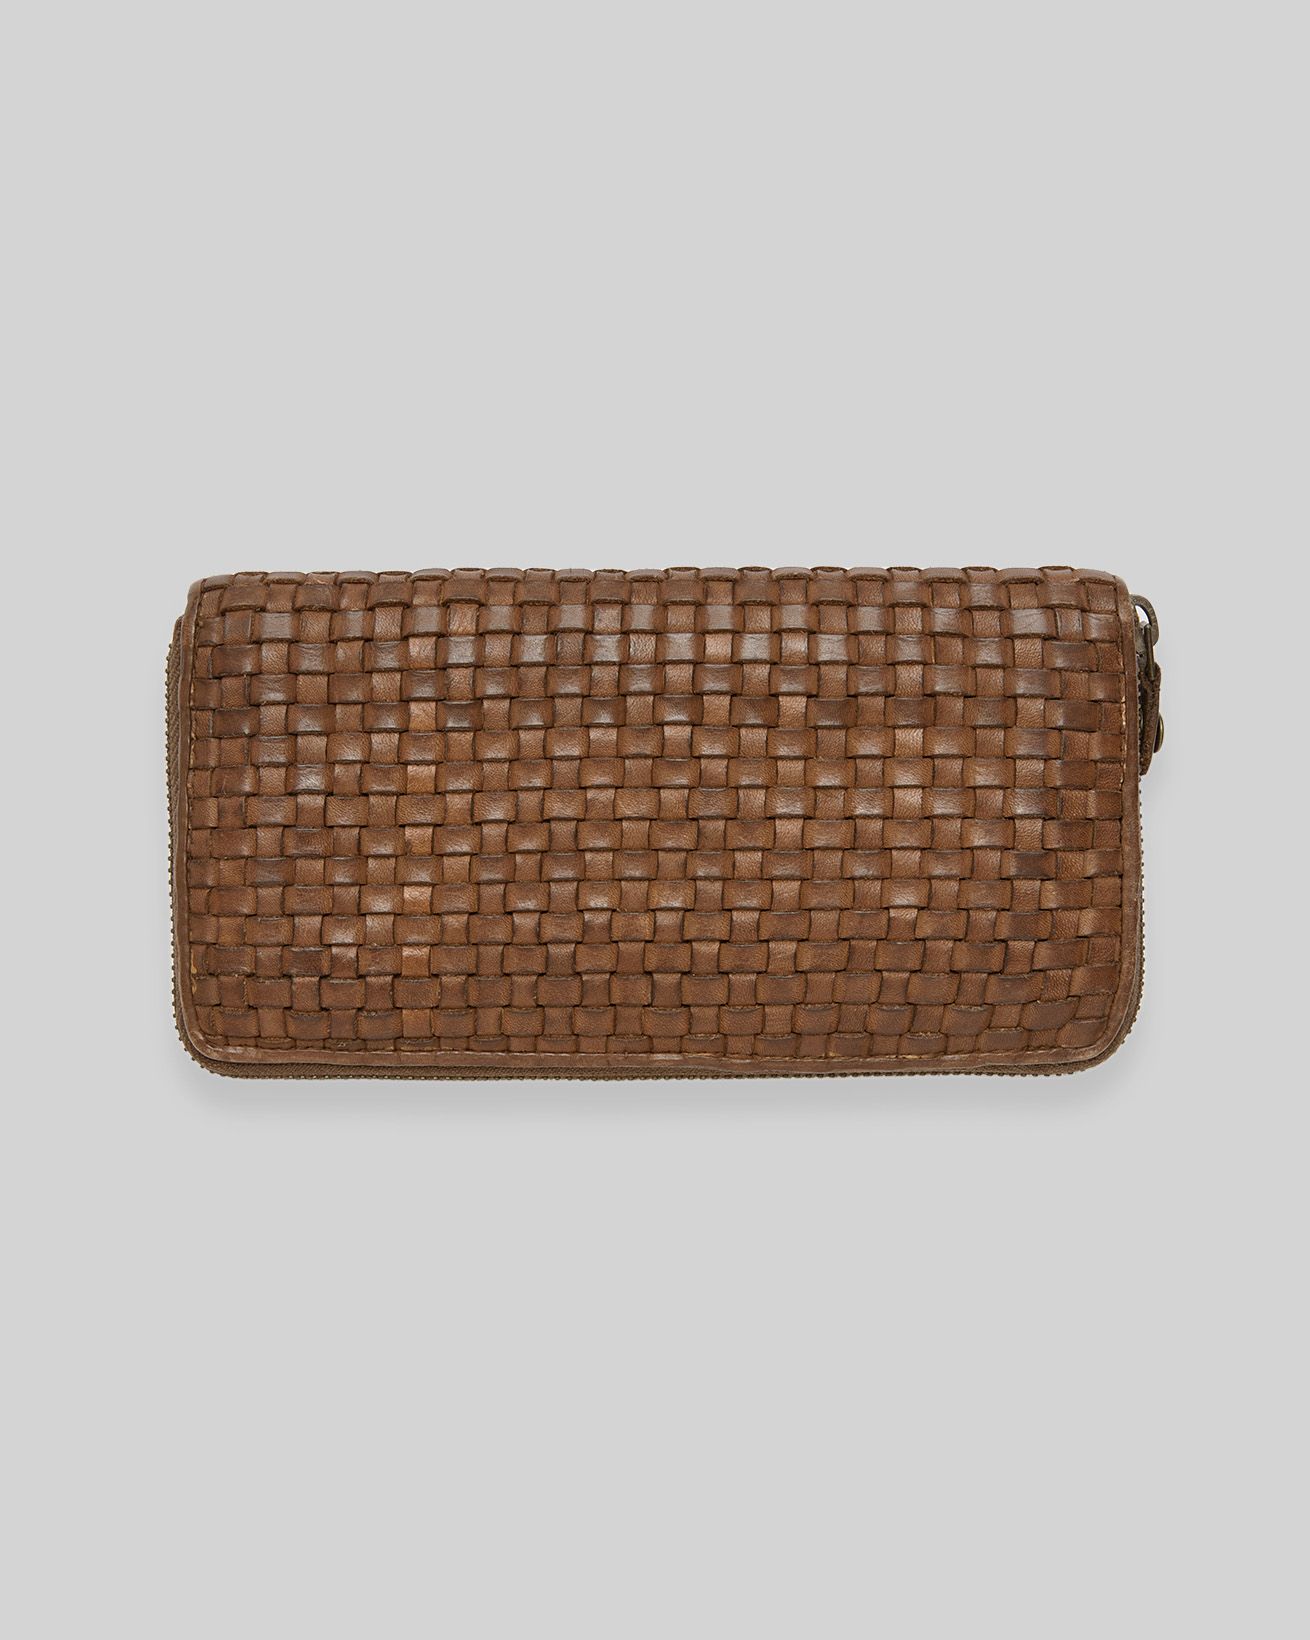 Woven Leather Matinee Purse